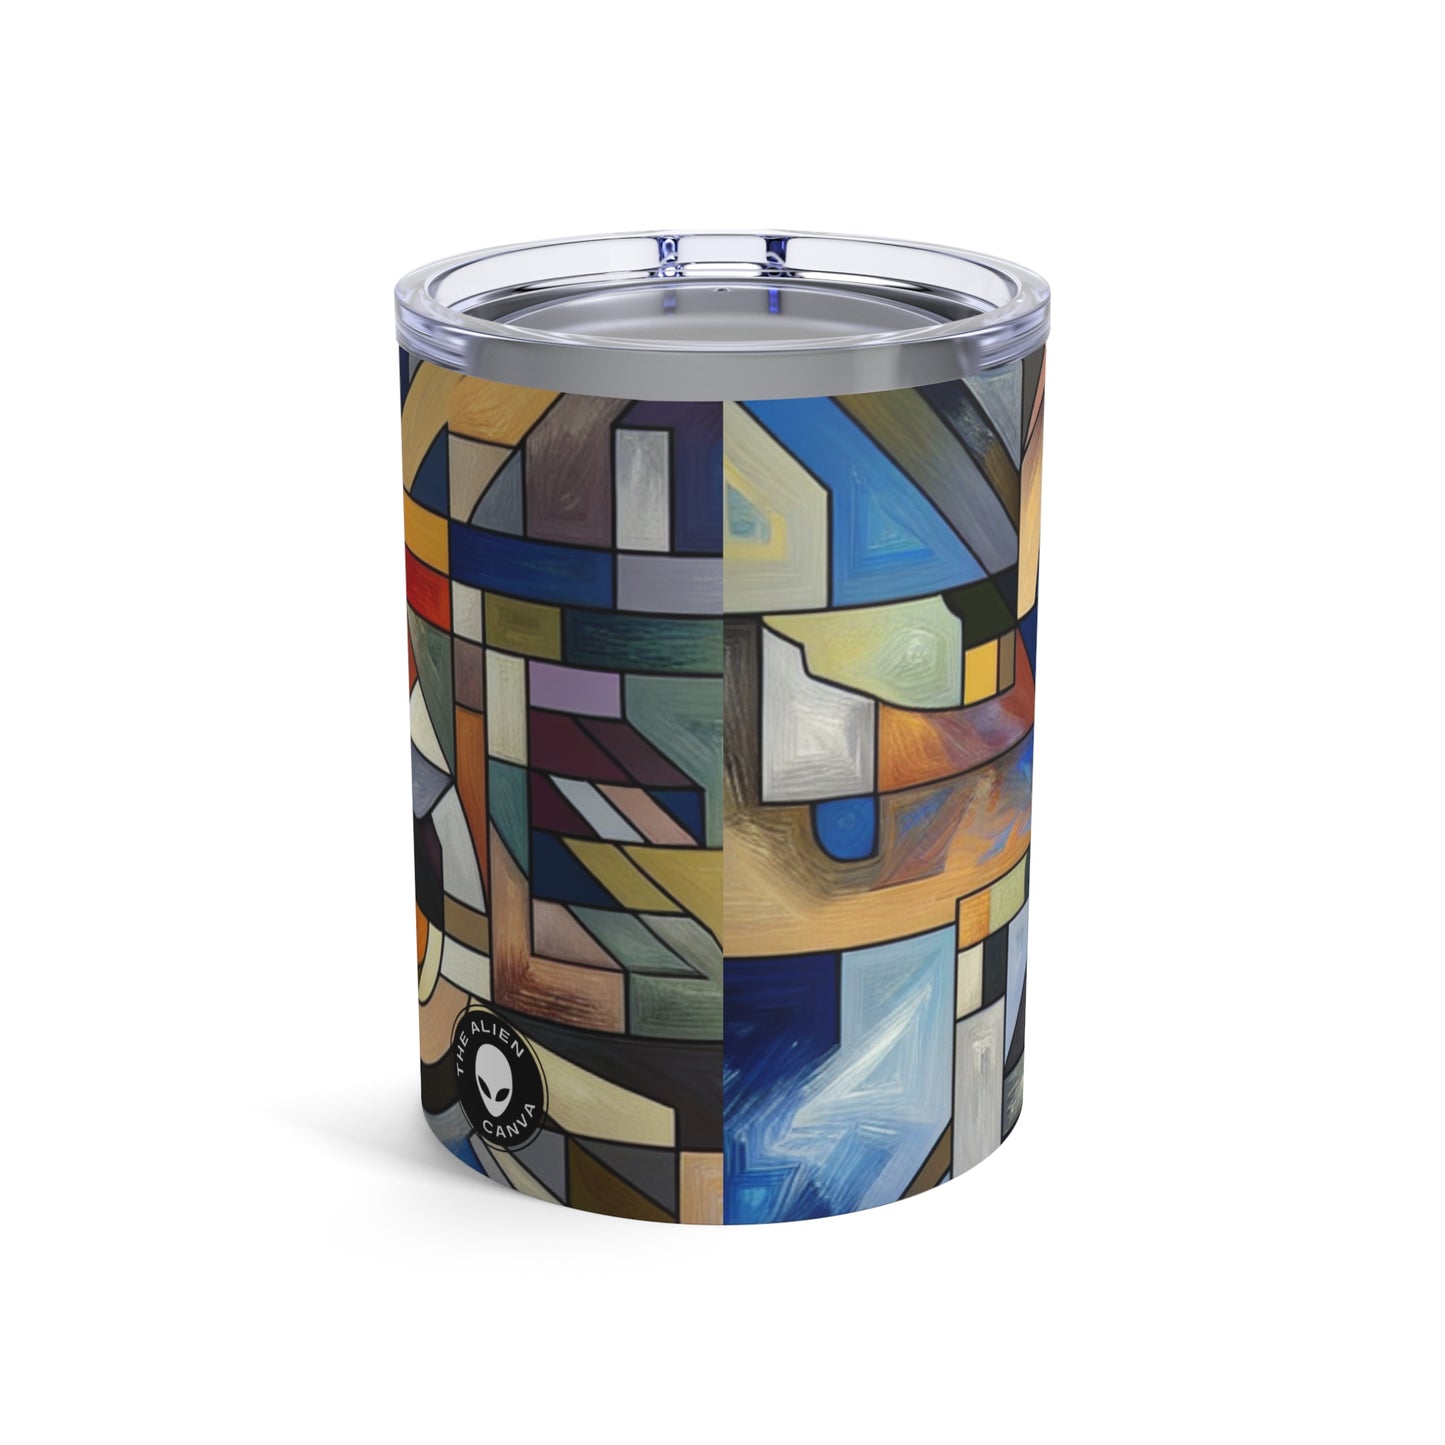 "Urban Fragmentation: An Analytical Cubist Cityscape" - The Alien Tumbler 10oz Analytical Cubism